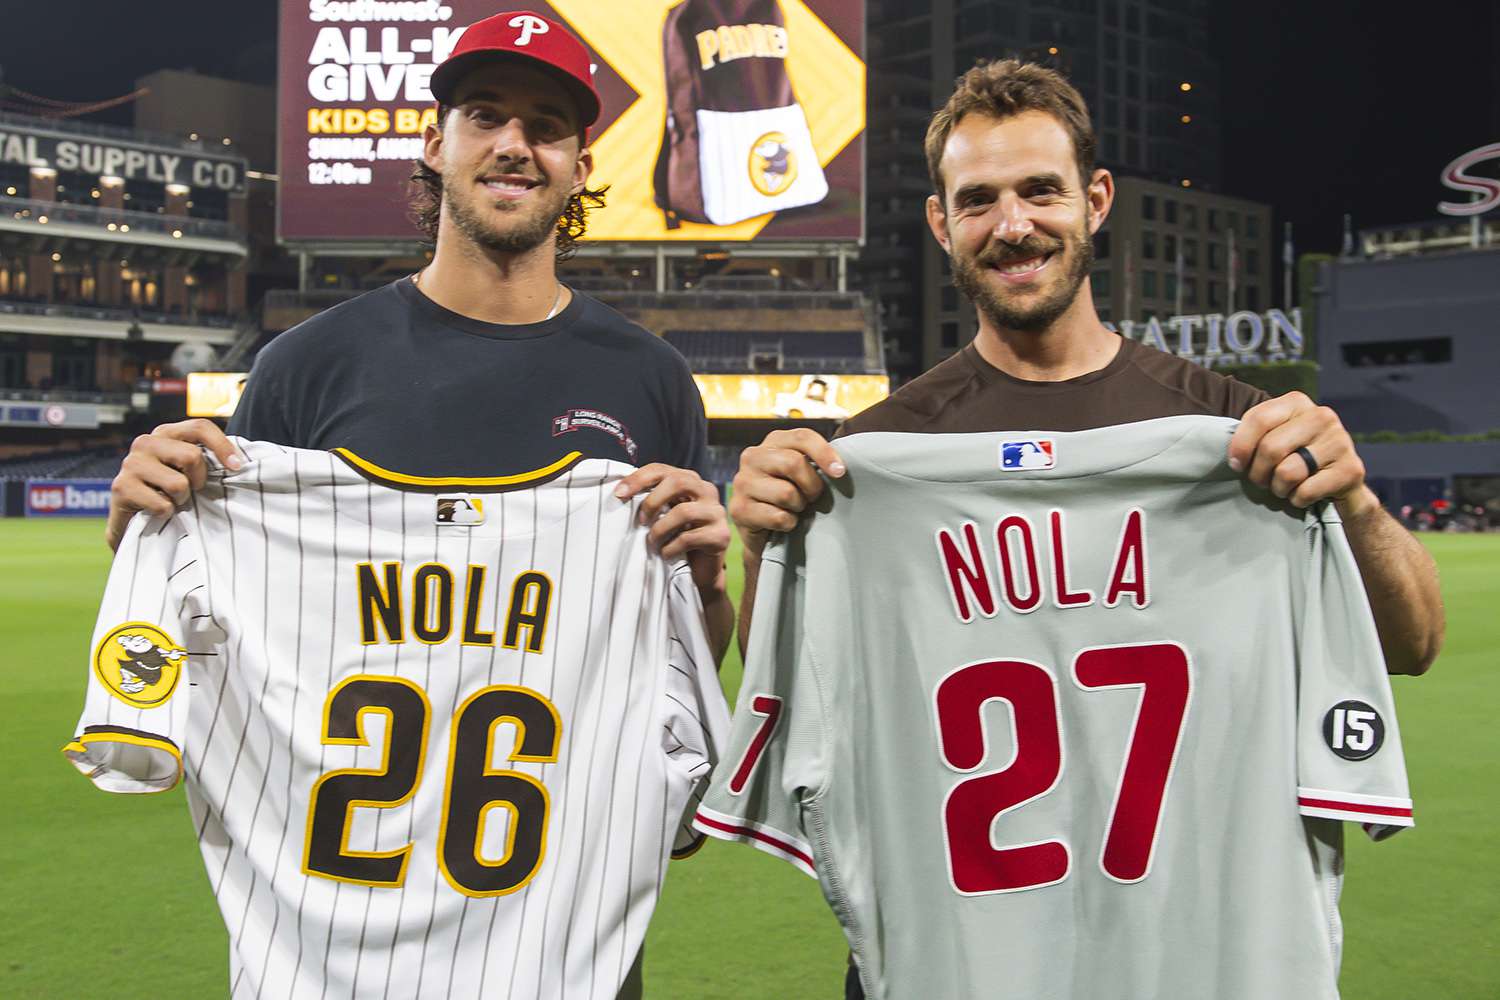 SAN DIEGO, CA - AUGUST 21: Austin Nola #26 of the San Diego Padres swaps jerseys with his brother Aaron Nola #27 of the Philadelphia Phillies on August 21, 2021 at Petco Park in San Diego, California. (Photo by Matt Thomas/San Diego Padres/Getty Images)